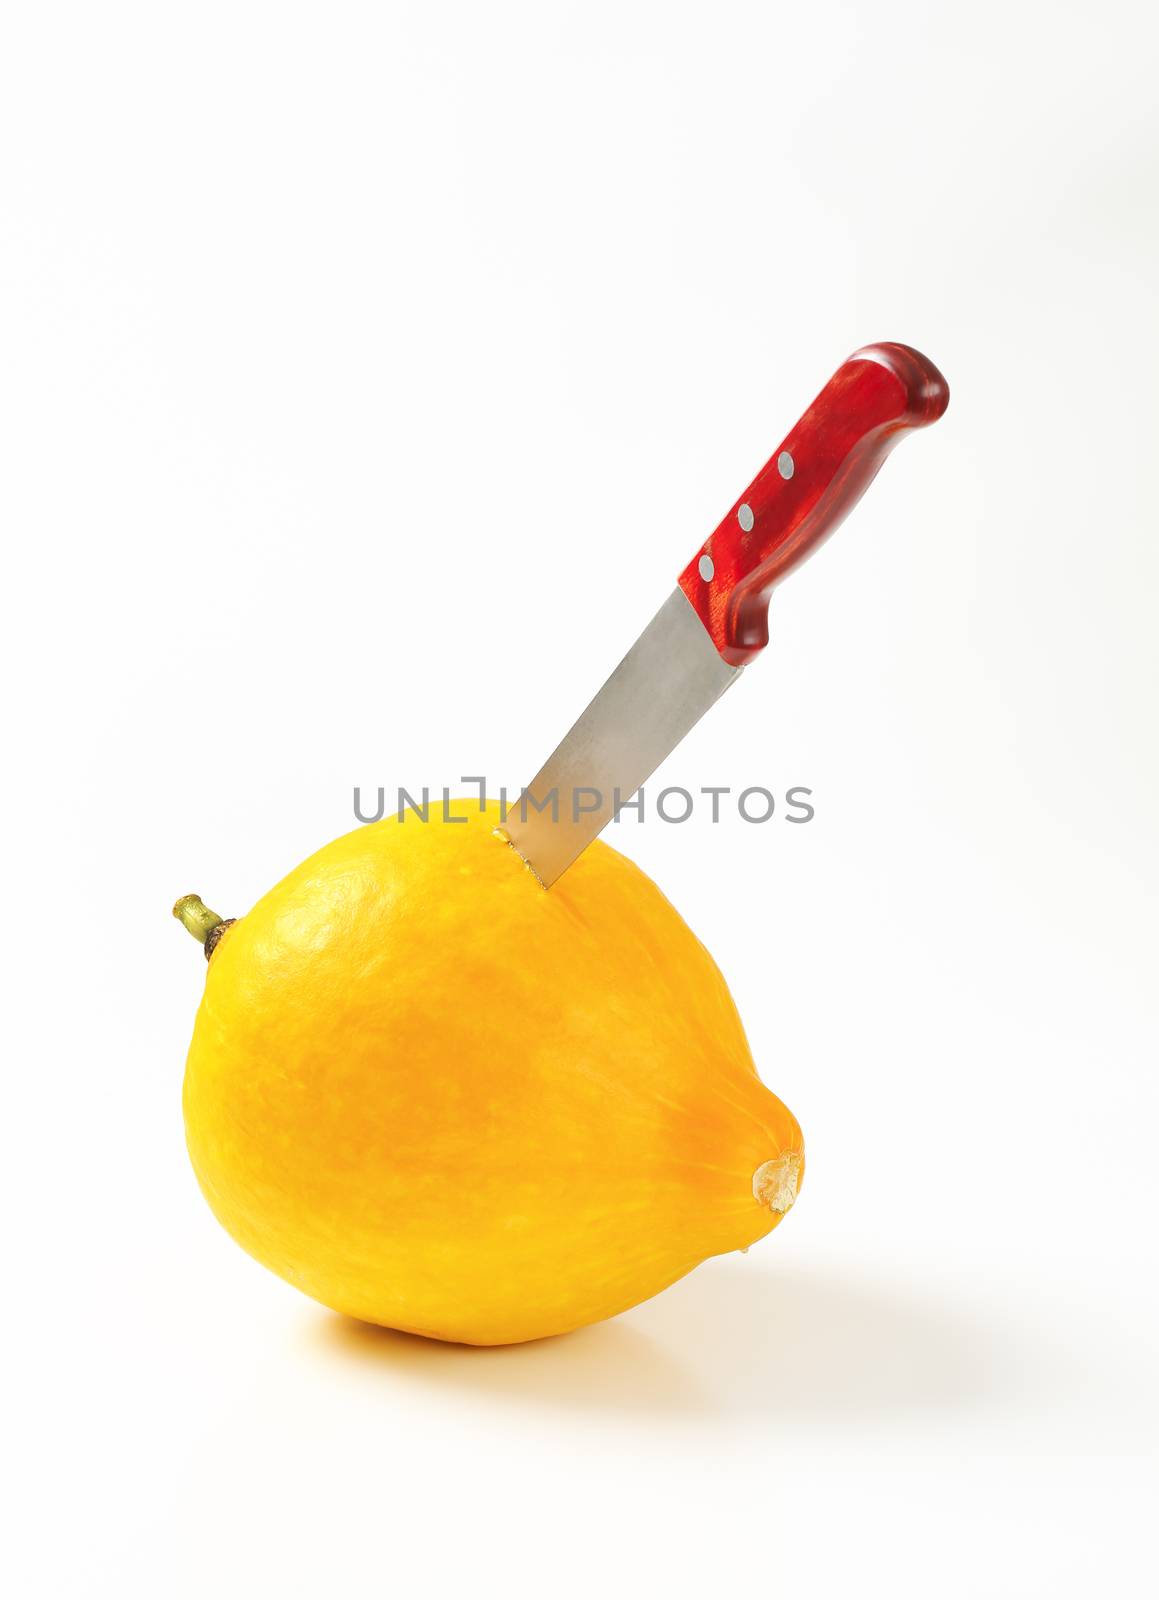 Ripe yellow summer squash and kitchen knife